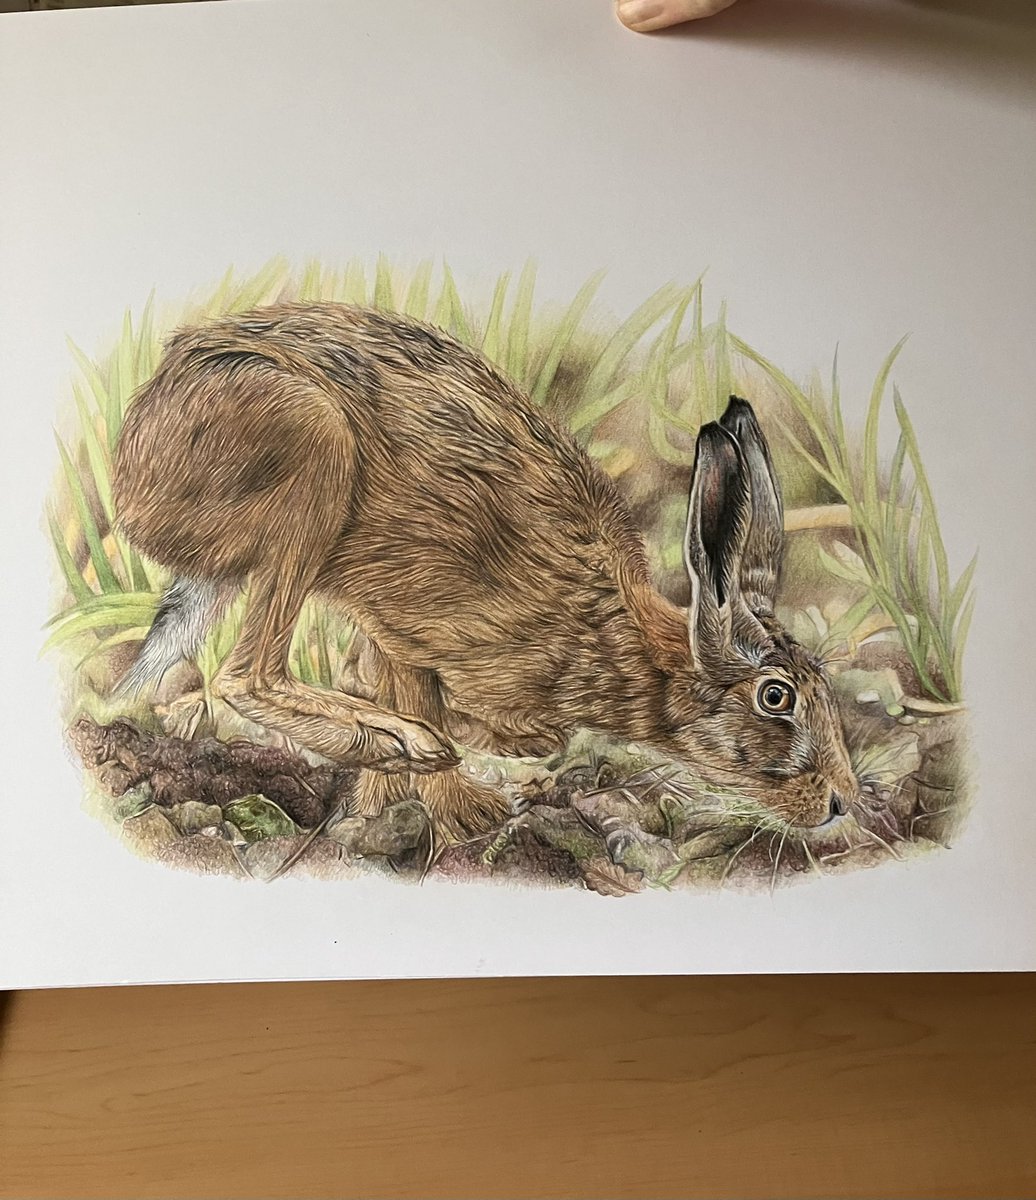 This one is now complete. It’ll be off to the US quite soon I hope. #art #drawing #hare #colouredpencilart